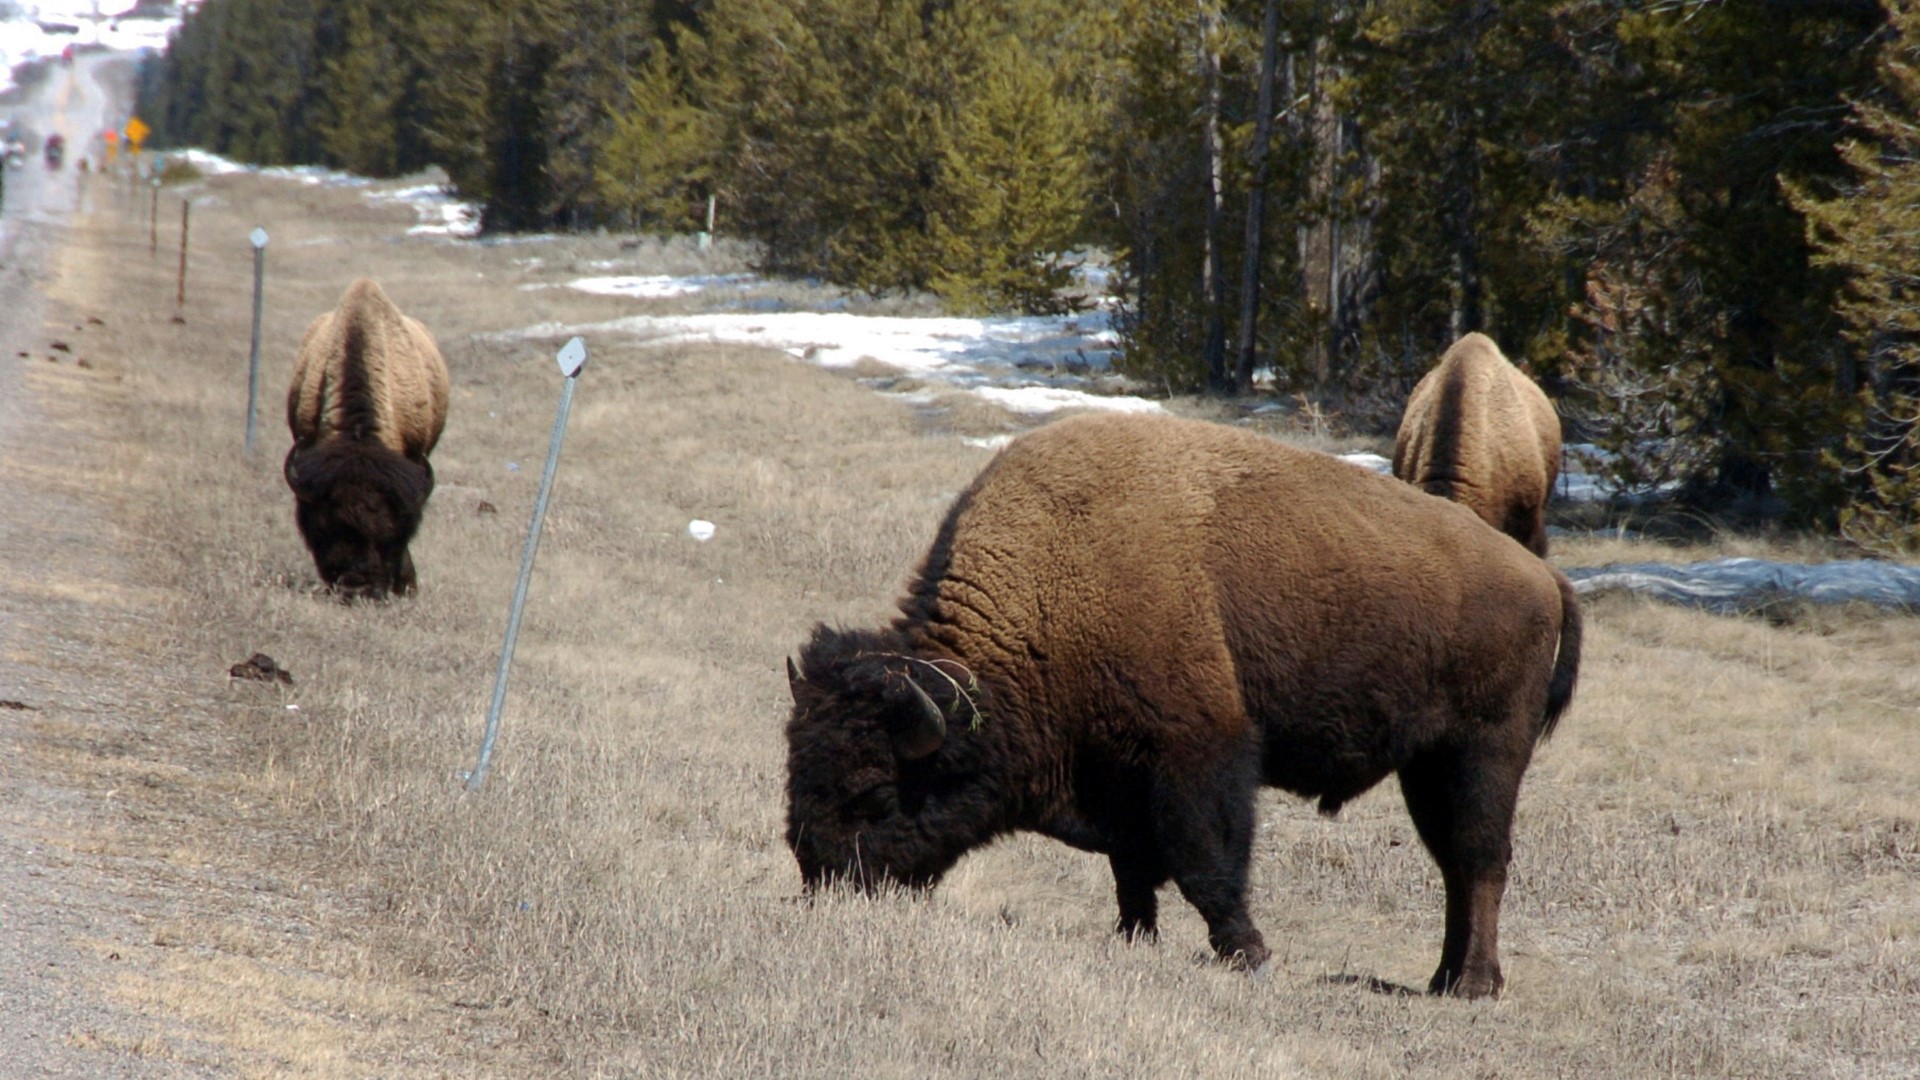 As the bison walked near a boardwalk, the woman approached it. The bison then gored and tossed her 10 feet into the air.